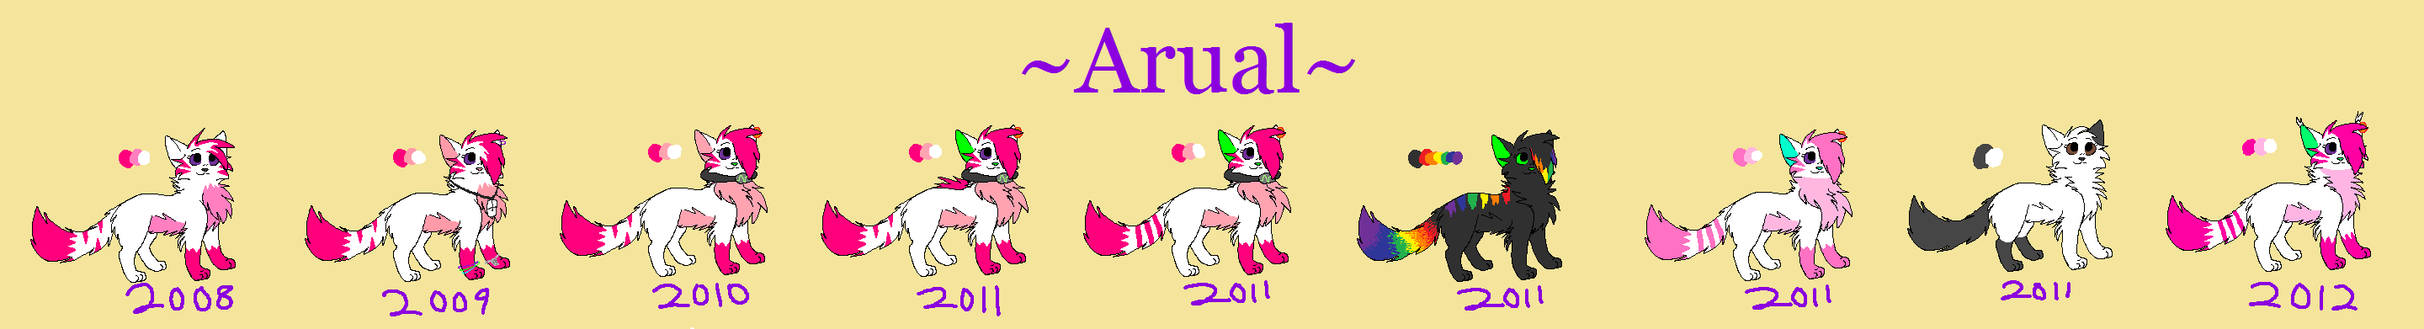 The evolution of Arual~